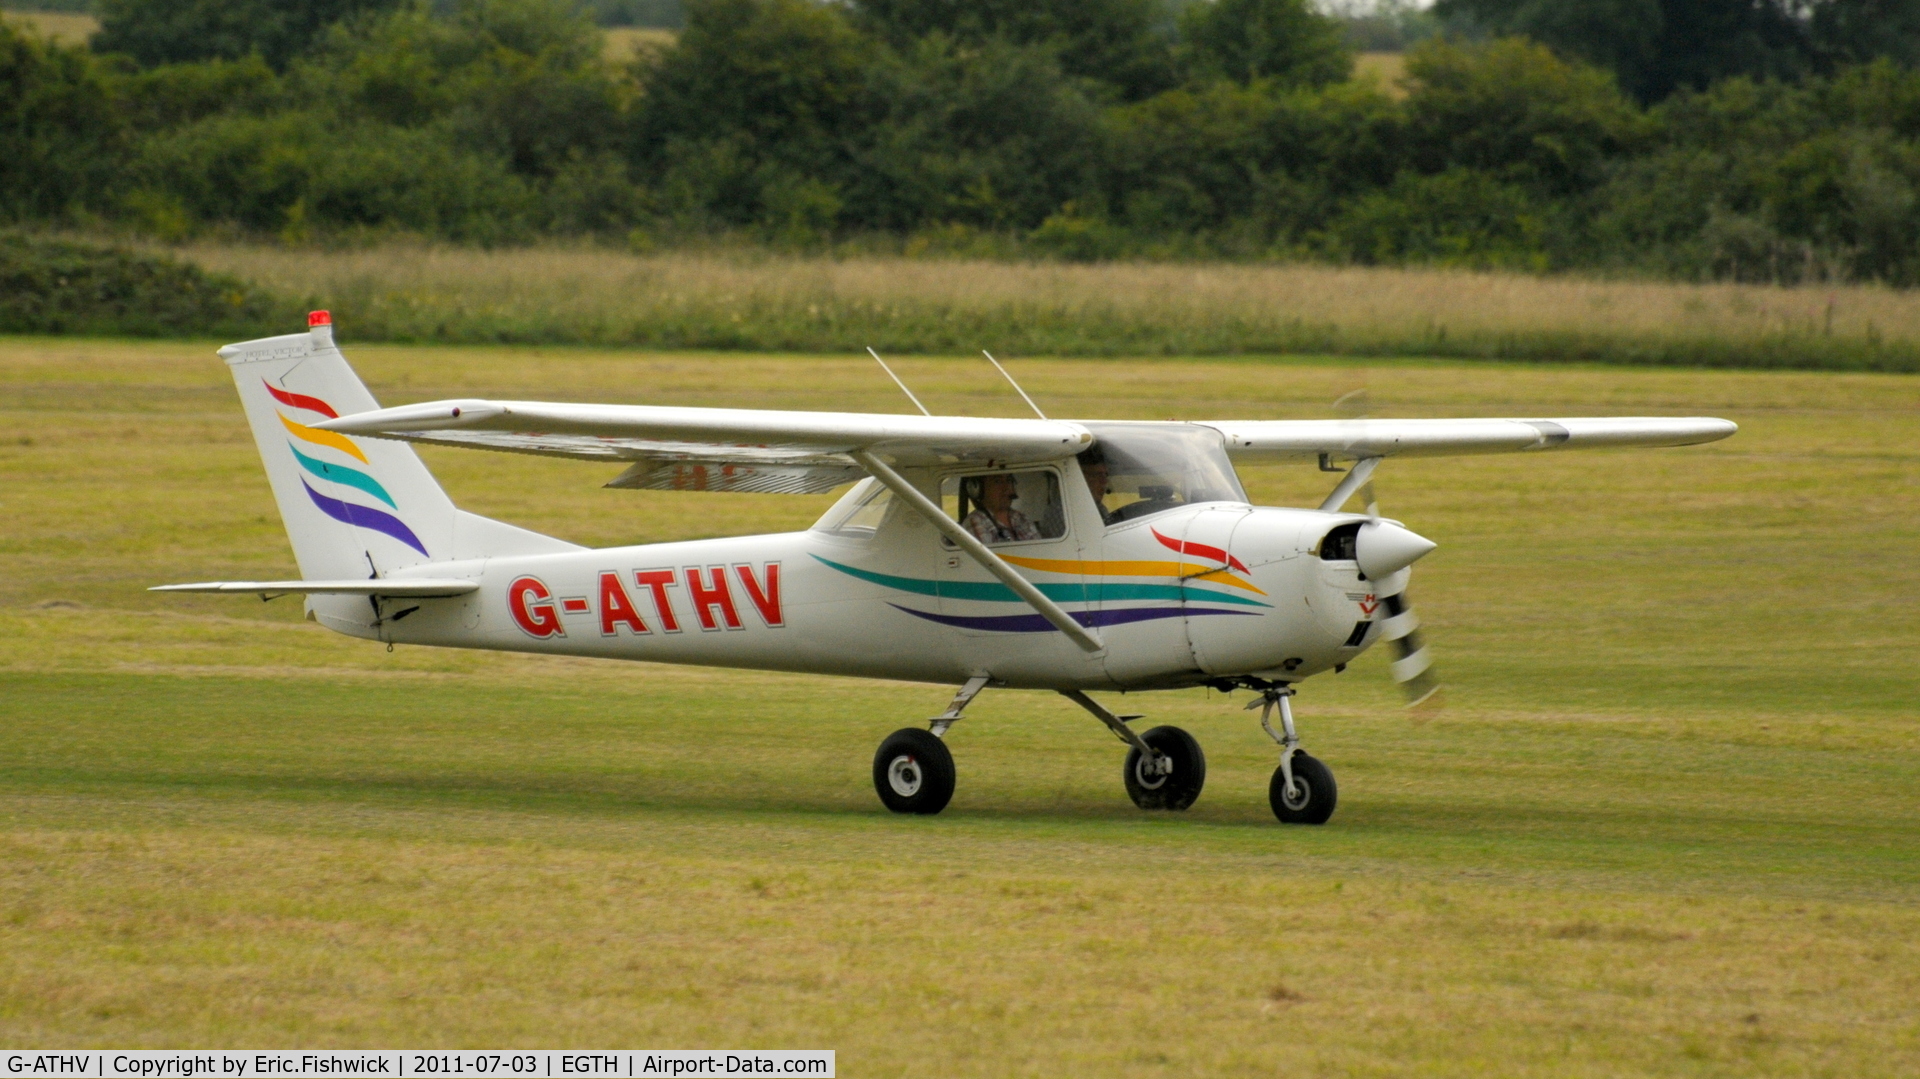 G-ATHV, 1966 Cessna 150F C/N 150-62019, G-ATHV at Shuttleworth Military Pagent Air Display, July 2011